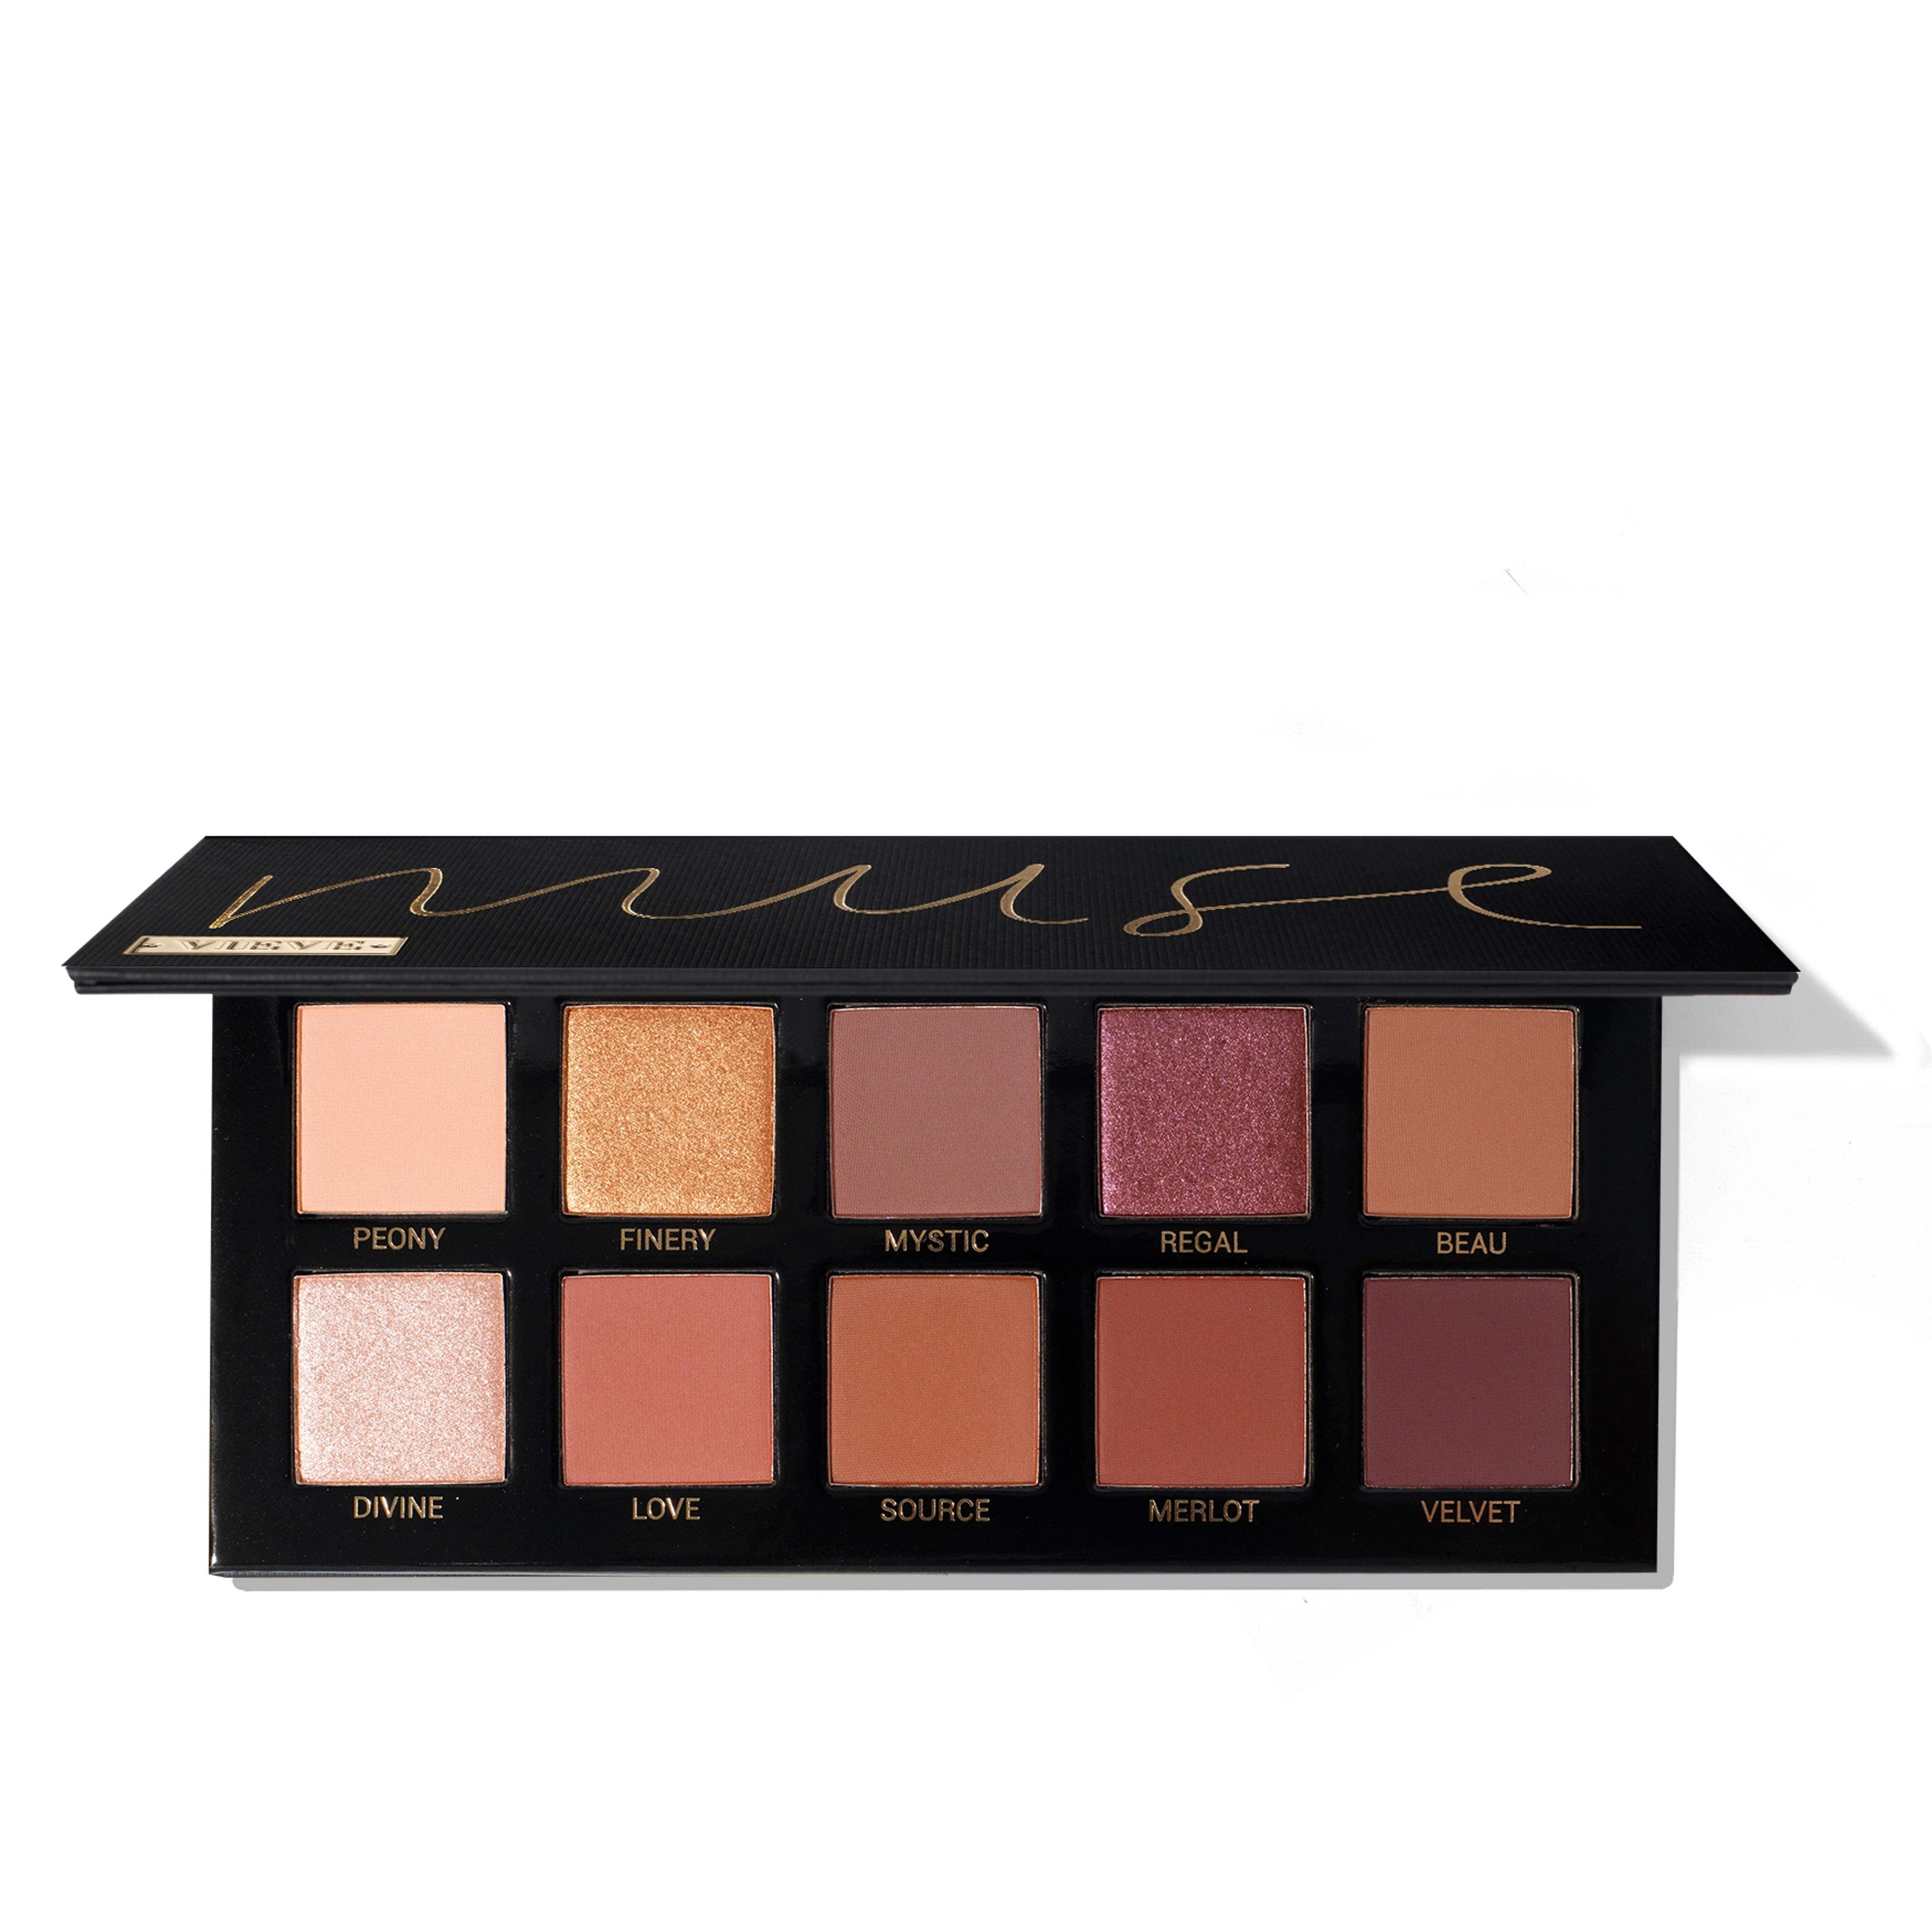 Vieve The Muse Palette | Space NK